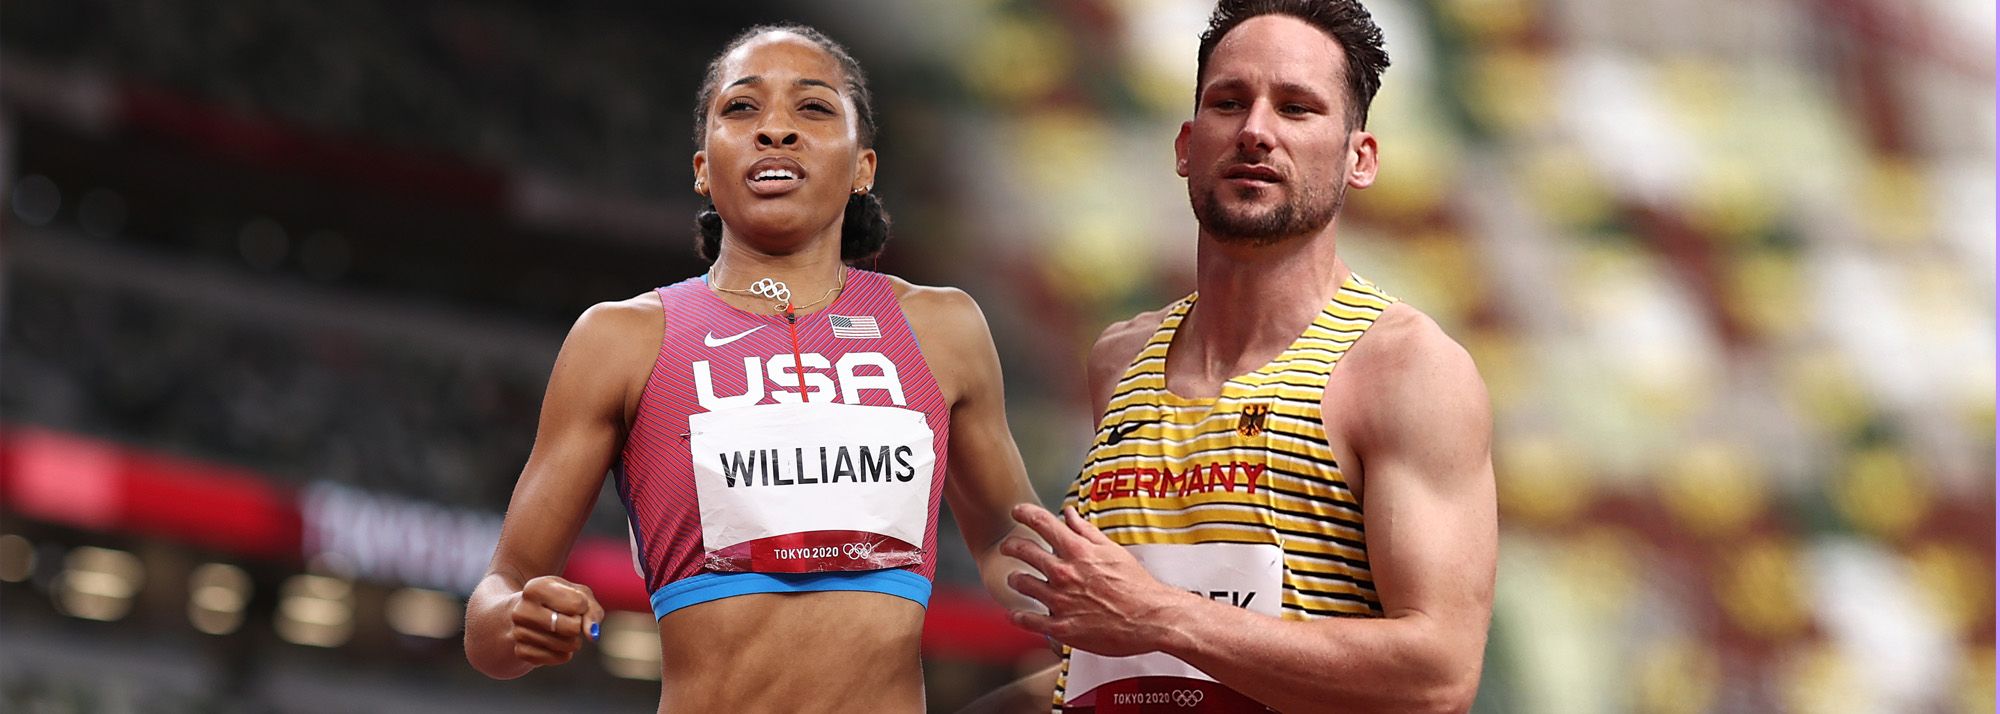 USA’s Kendell Williams and Germany’s Kai Kazmirek topped the end-of-season standings in the 2021 World Athletics Challenge – Combined Events.